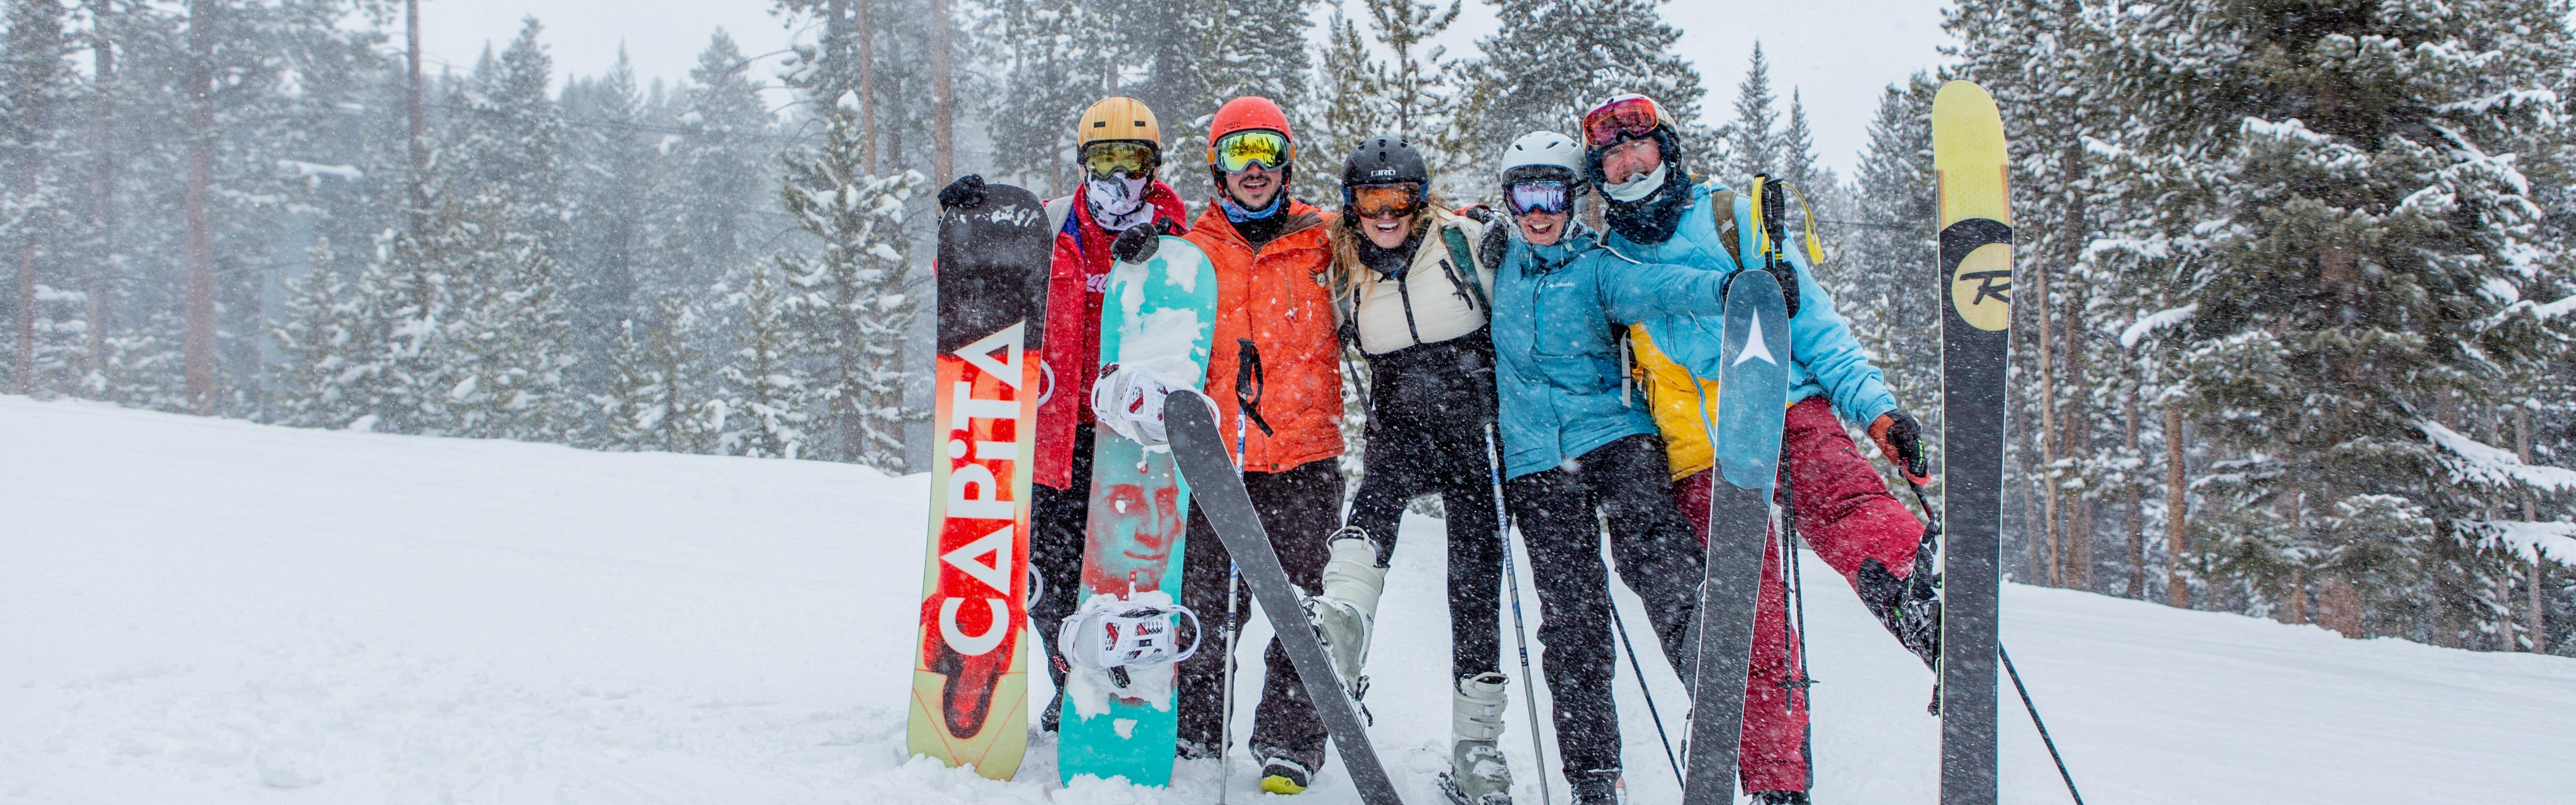 Skiing with Friends 101 Tips for an Ski Trip